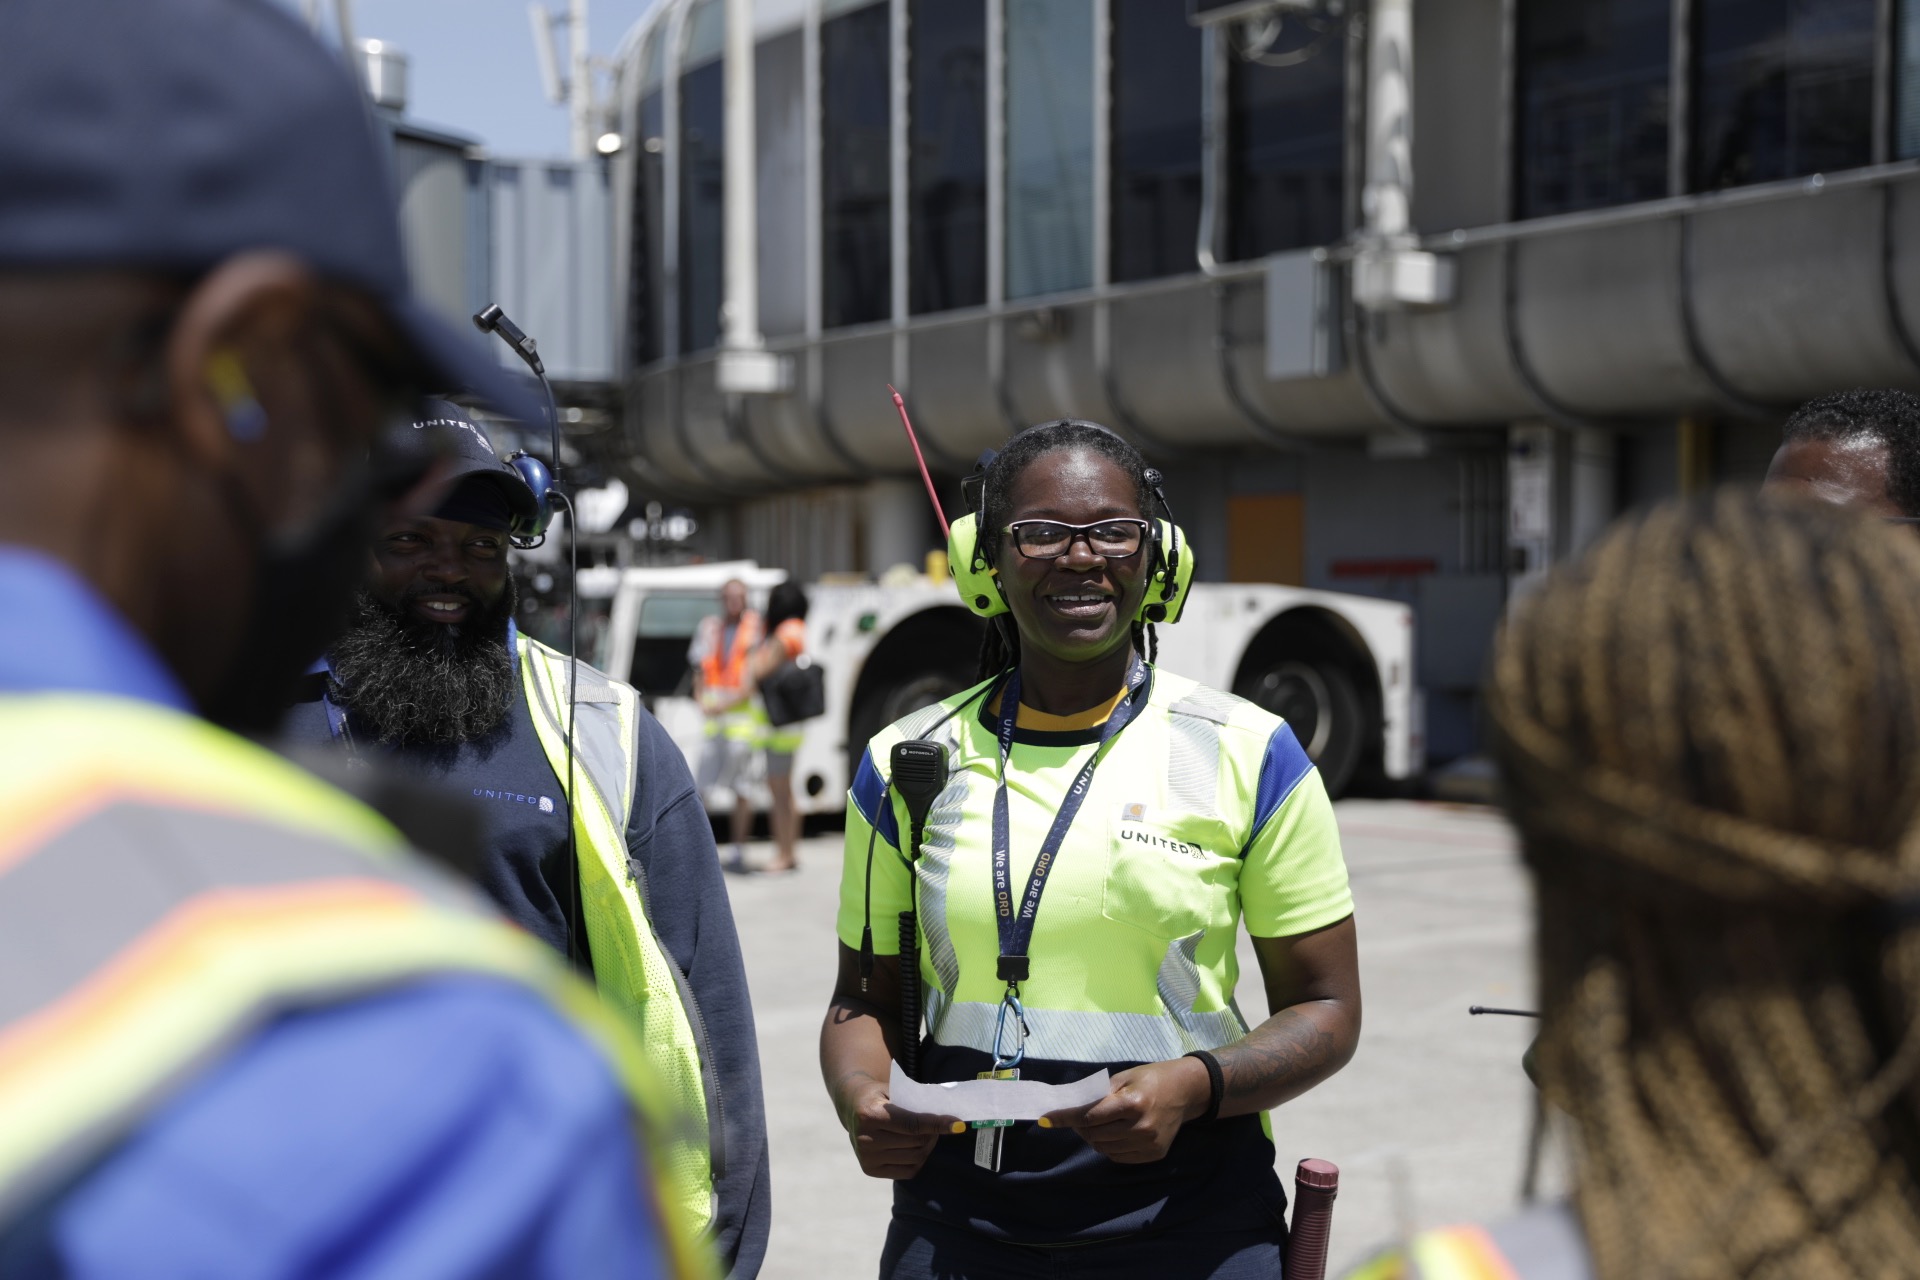 a group of people wearing safety vests and headphones